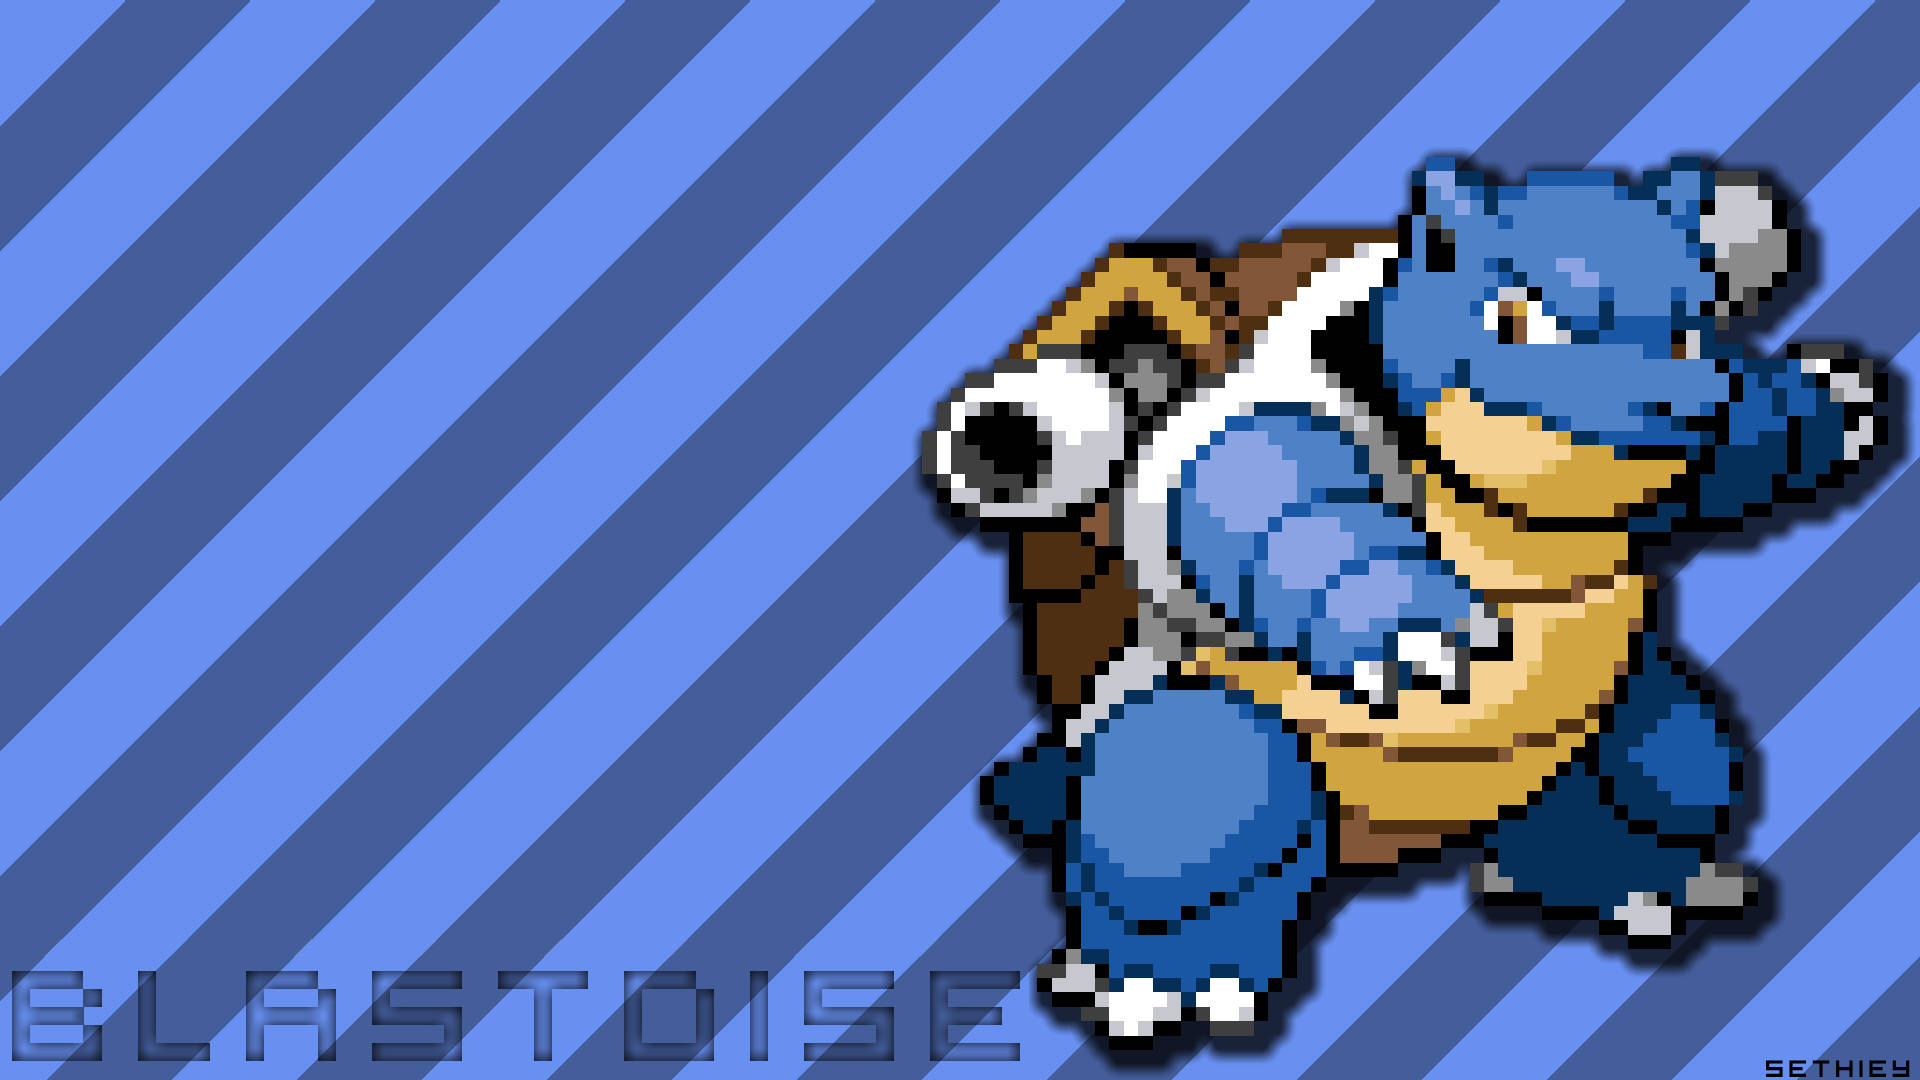 A Detailed View Of Blastoise, A Powerful Pokemon From The Kanto Region. Background